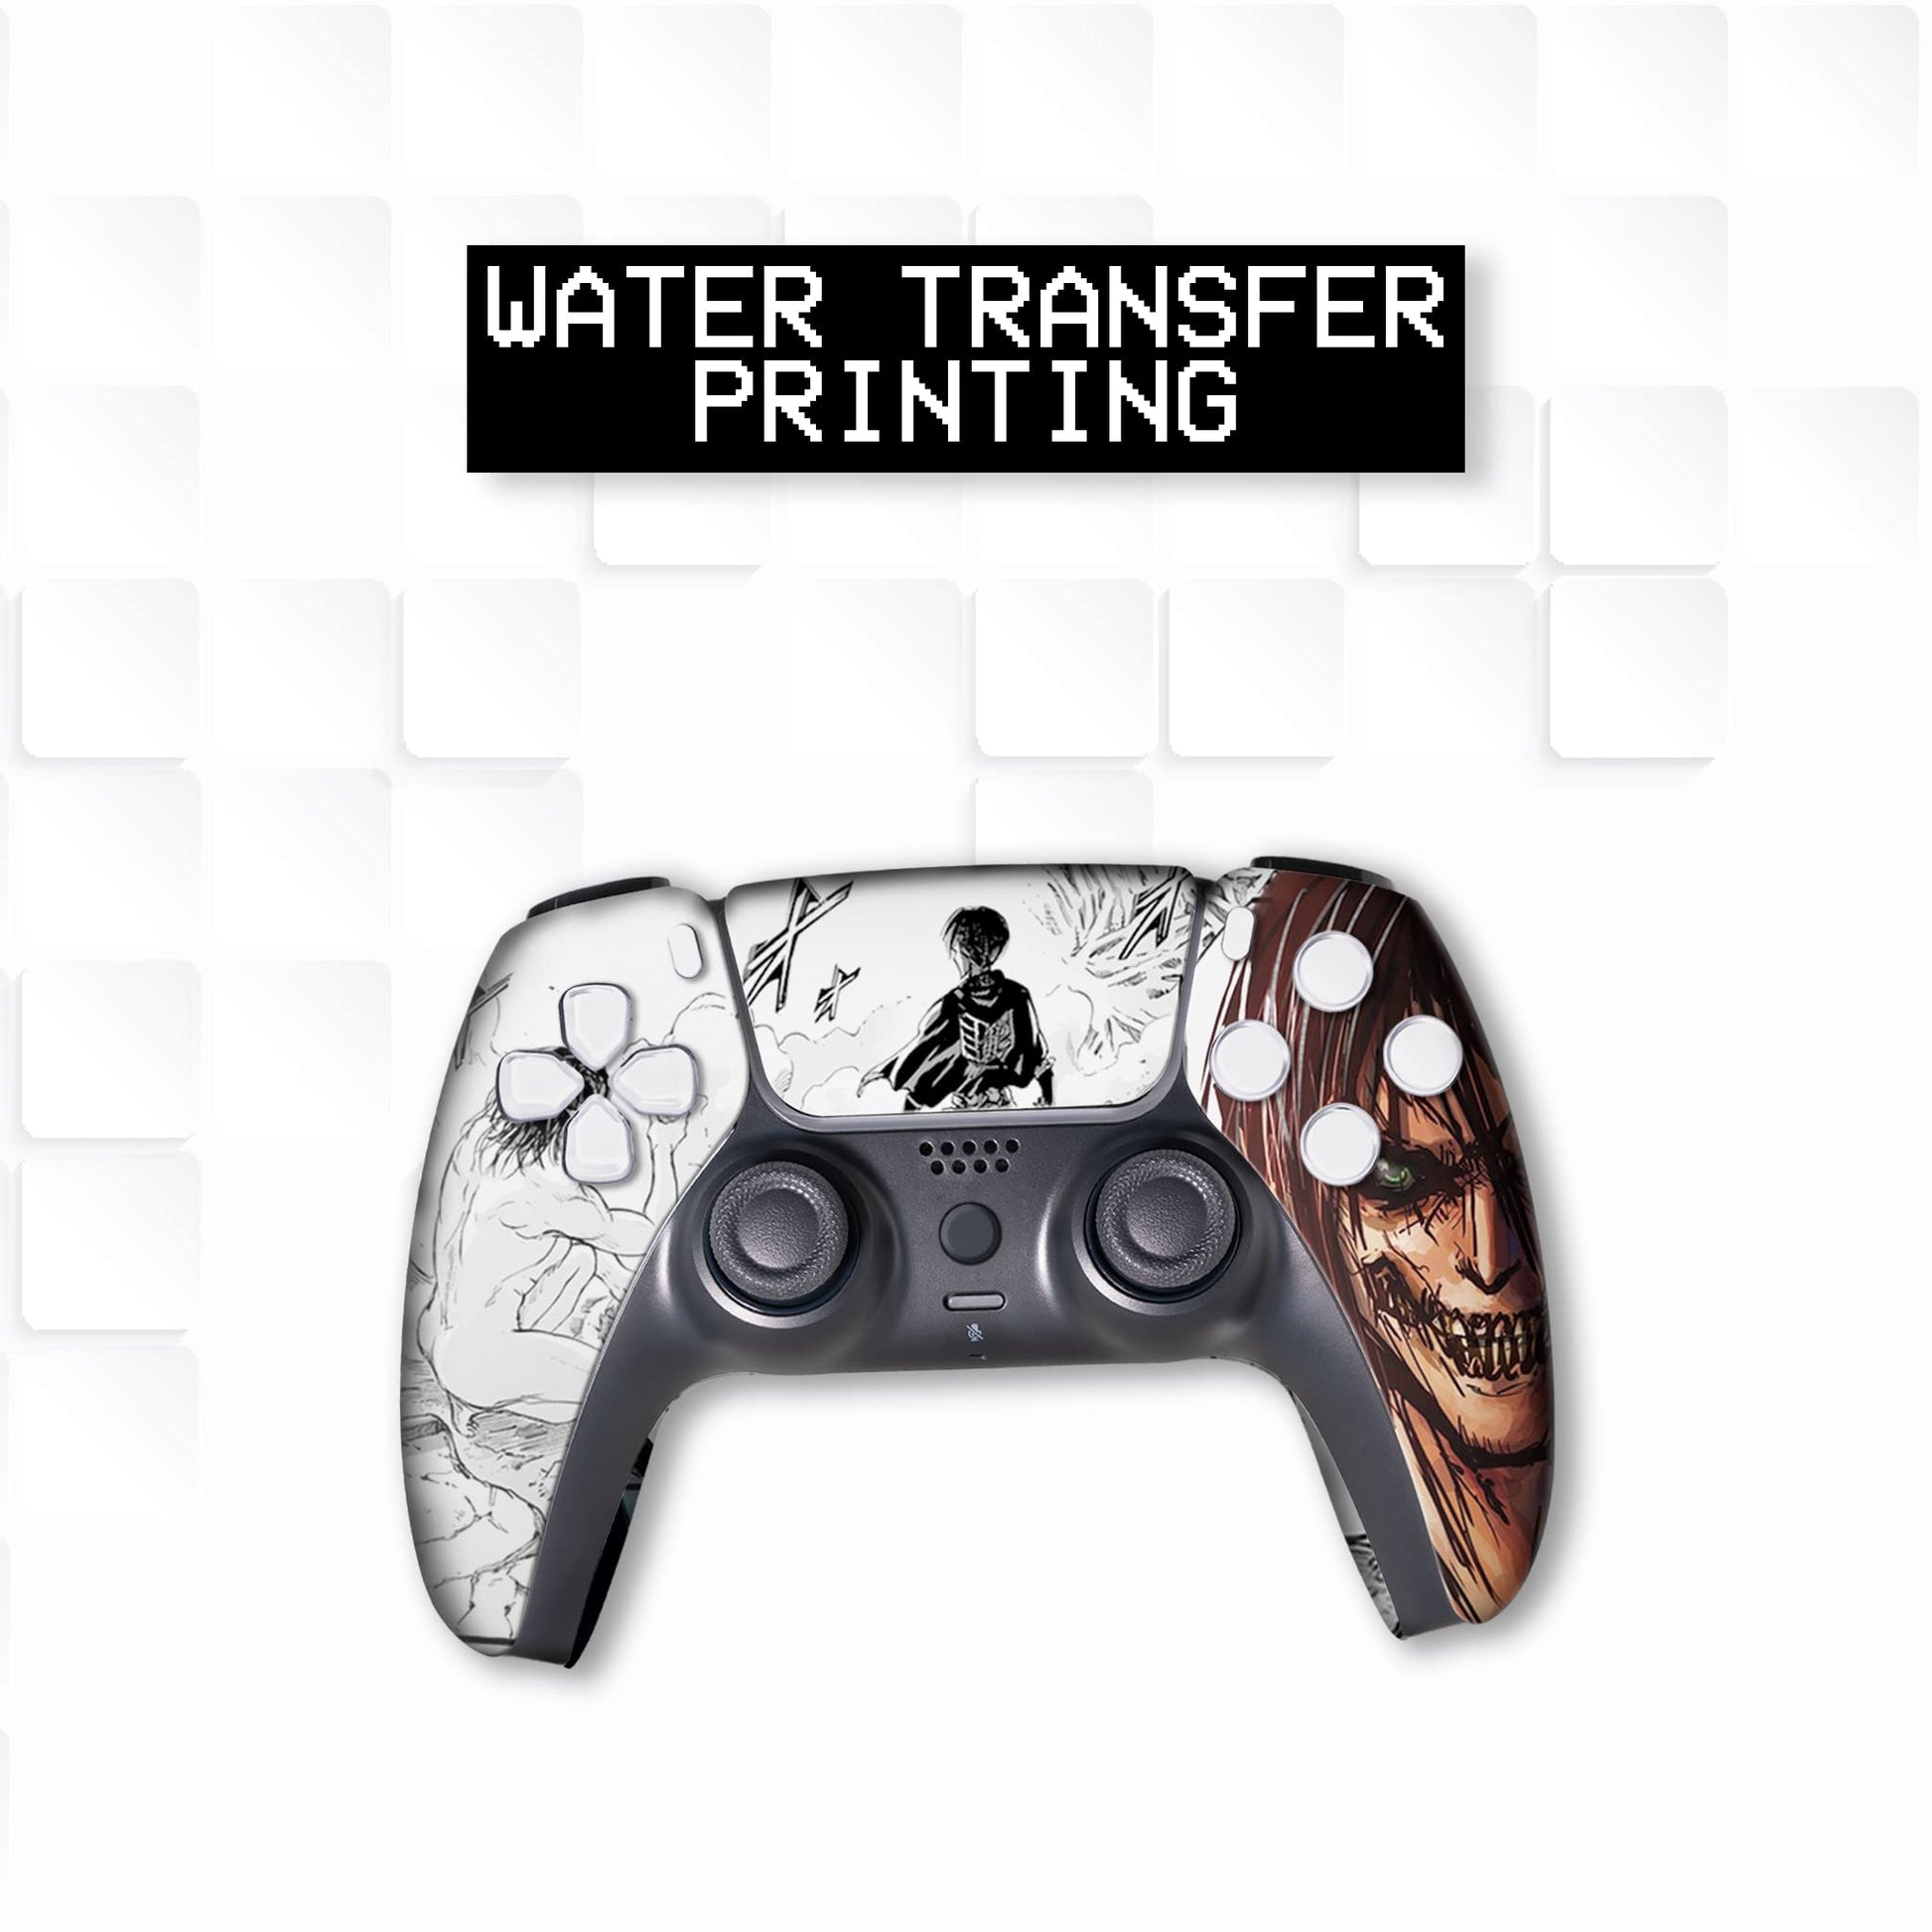 Attackk On Titan Custom PS-5 Controller Wireless compatible with Play-Station 5 Console by BCB Controllers | Proudly Customized in USA with Permanent HYDRO-DIP Printing (NOT JUST A SKIN) - amzGamess